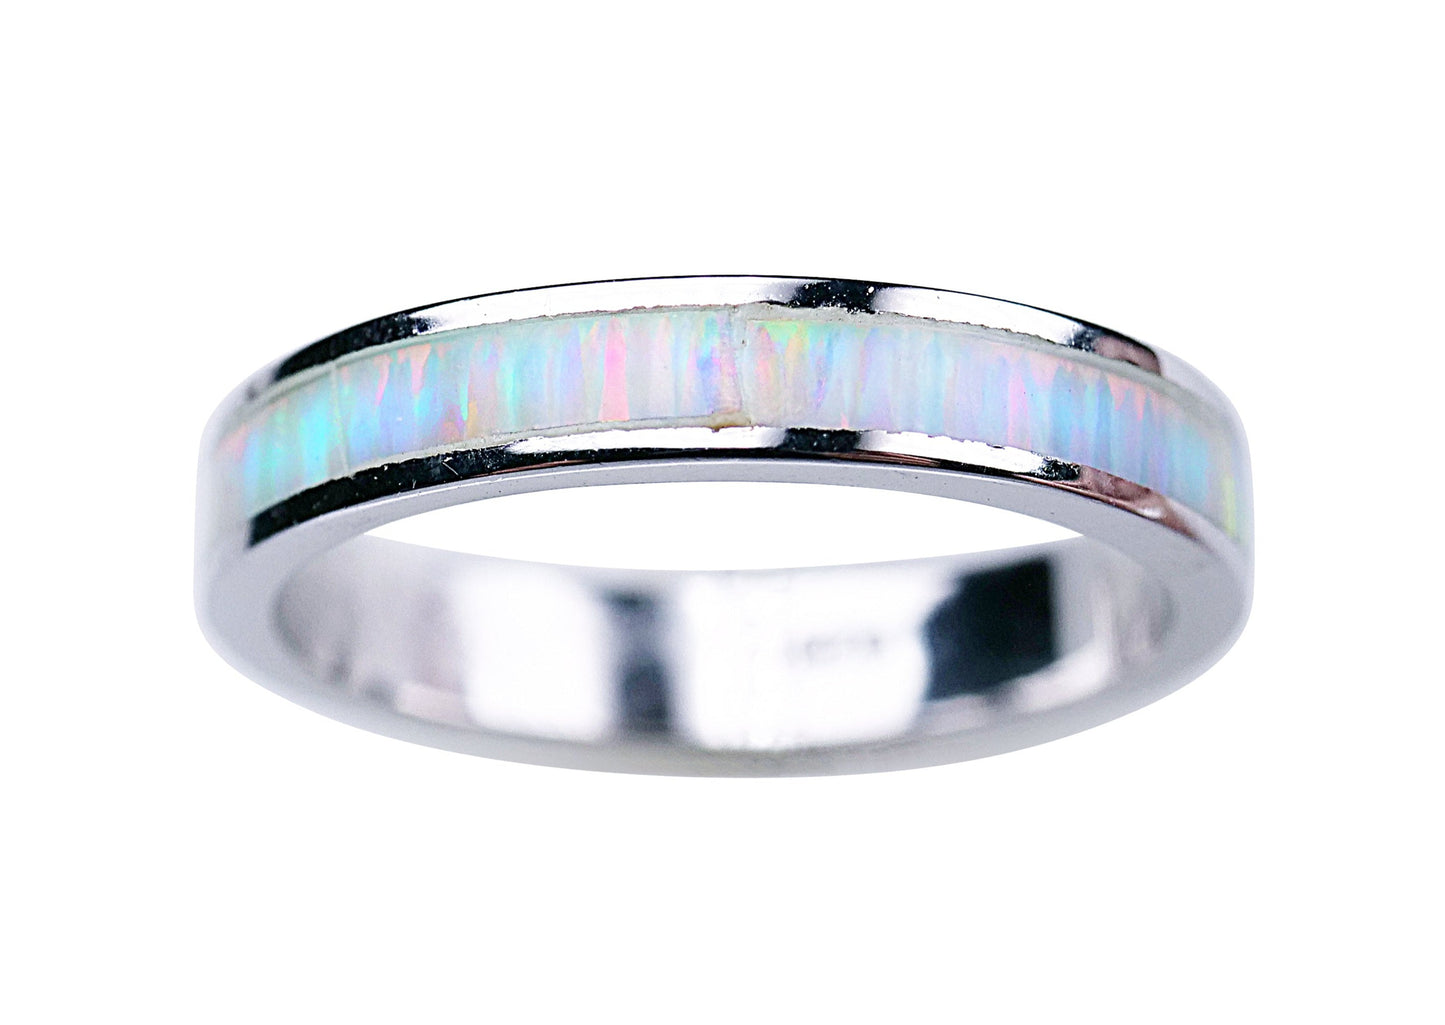 4mm Channel White Opal - Thumb Ring - TH69-W